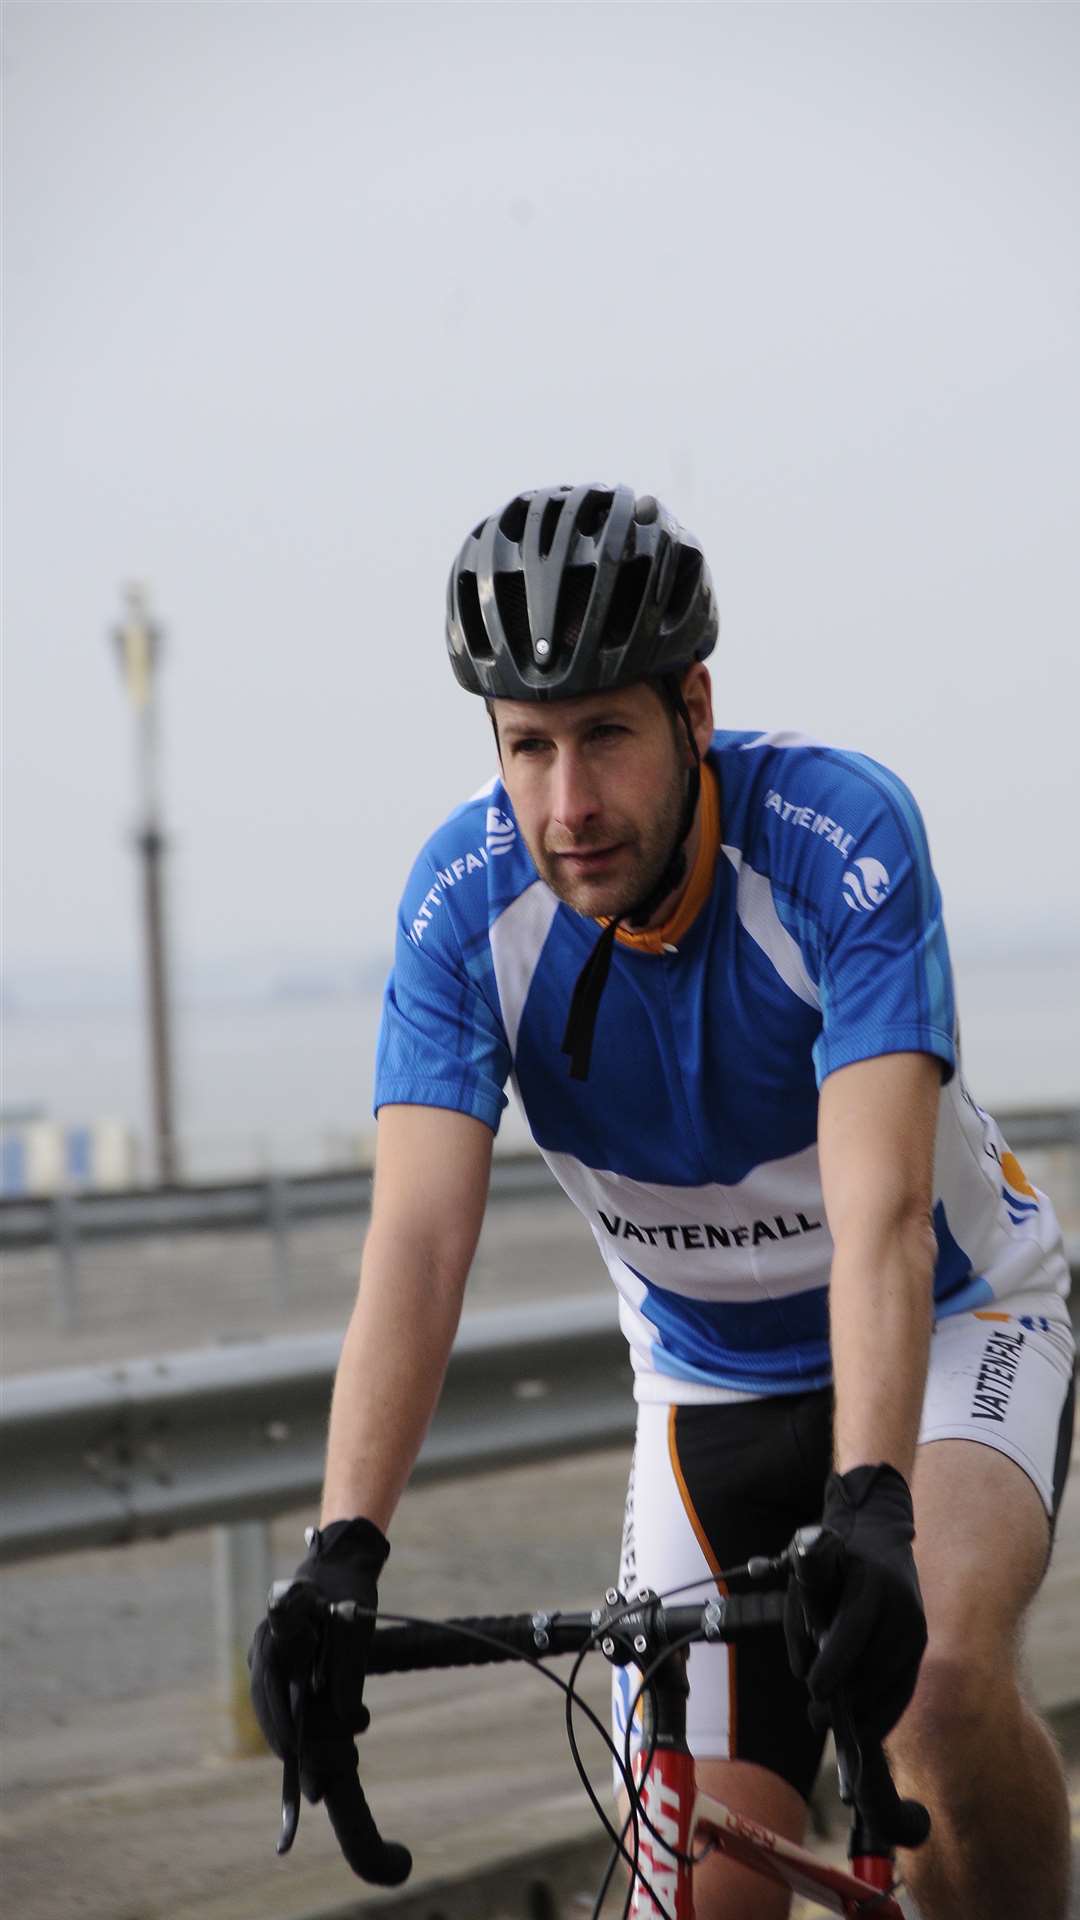 Matthew Green of Vattenfall Thanet Off Shore Wind Farm will be taking part in the KM Big Bike Ride this Sunday, April 26.